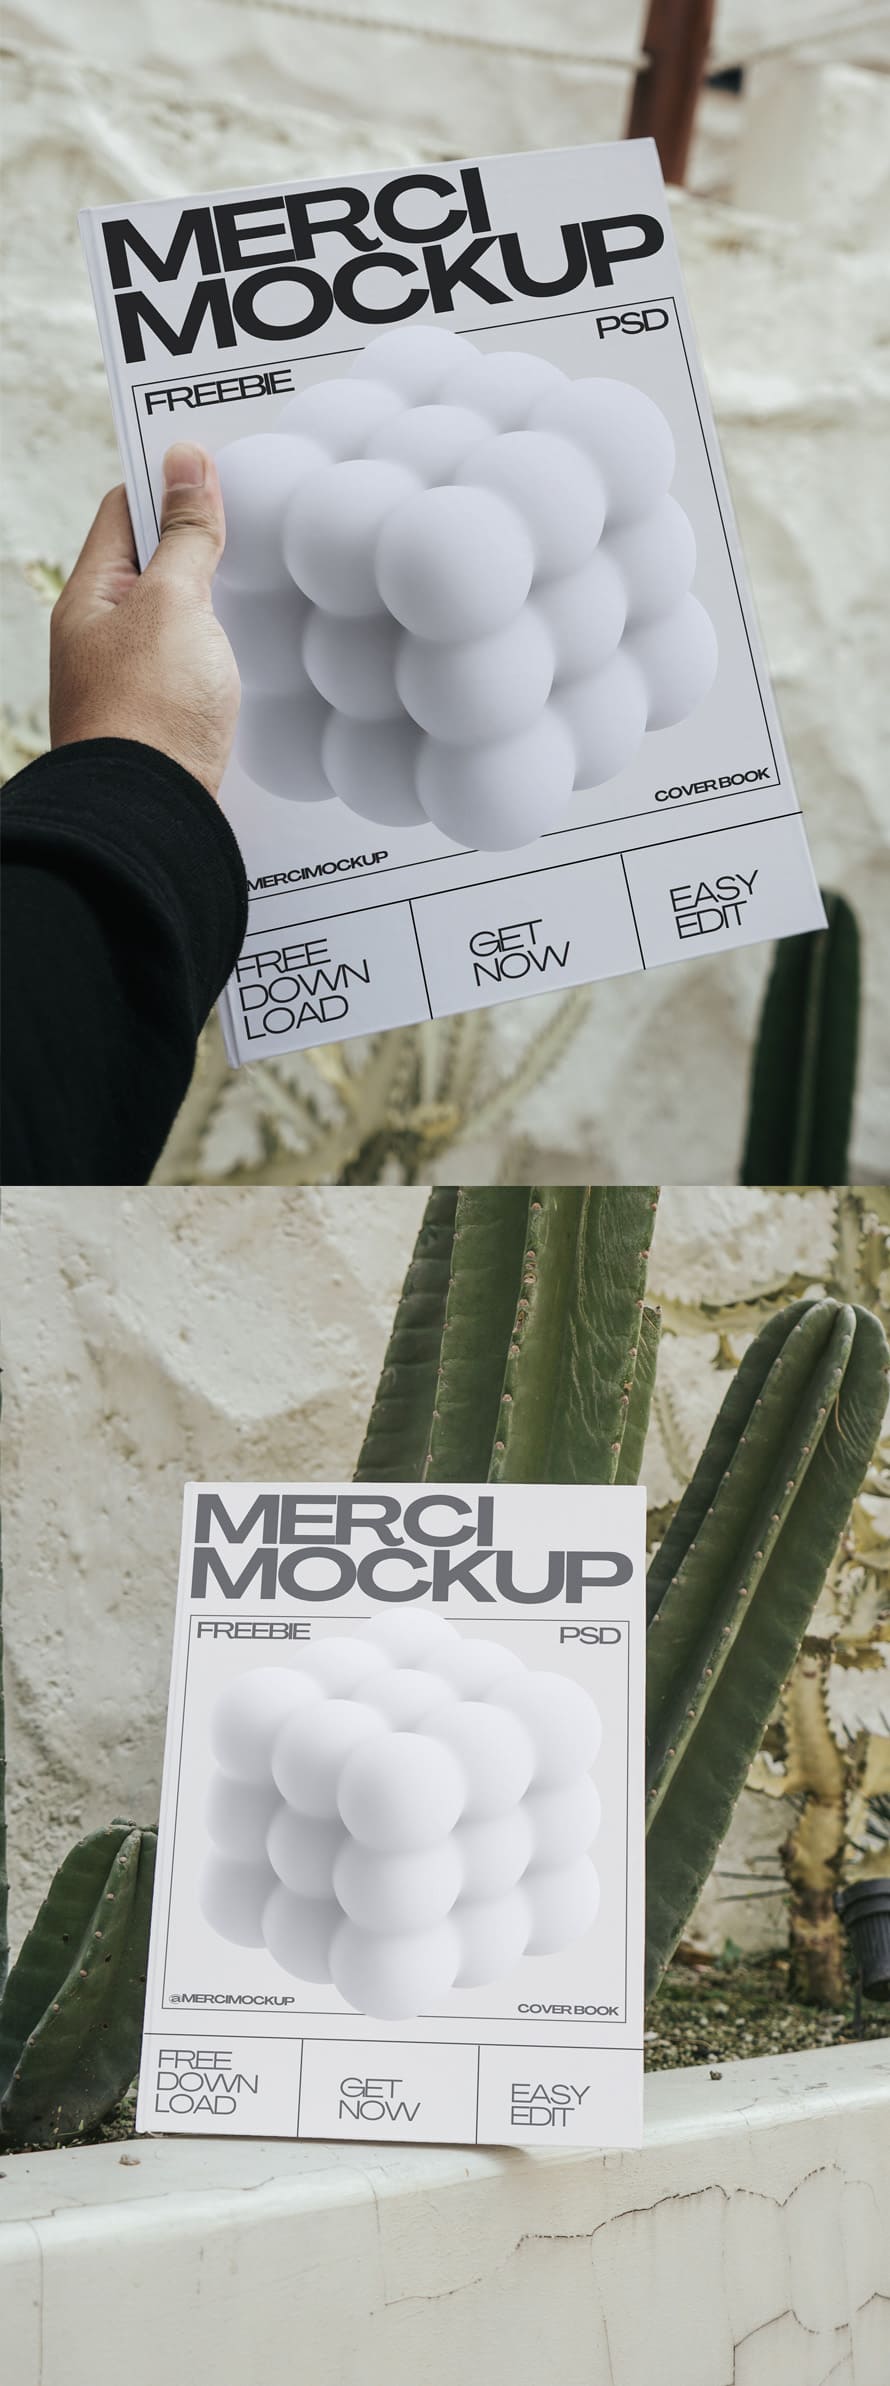 Free Cover Book Outdoor Mockup